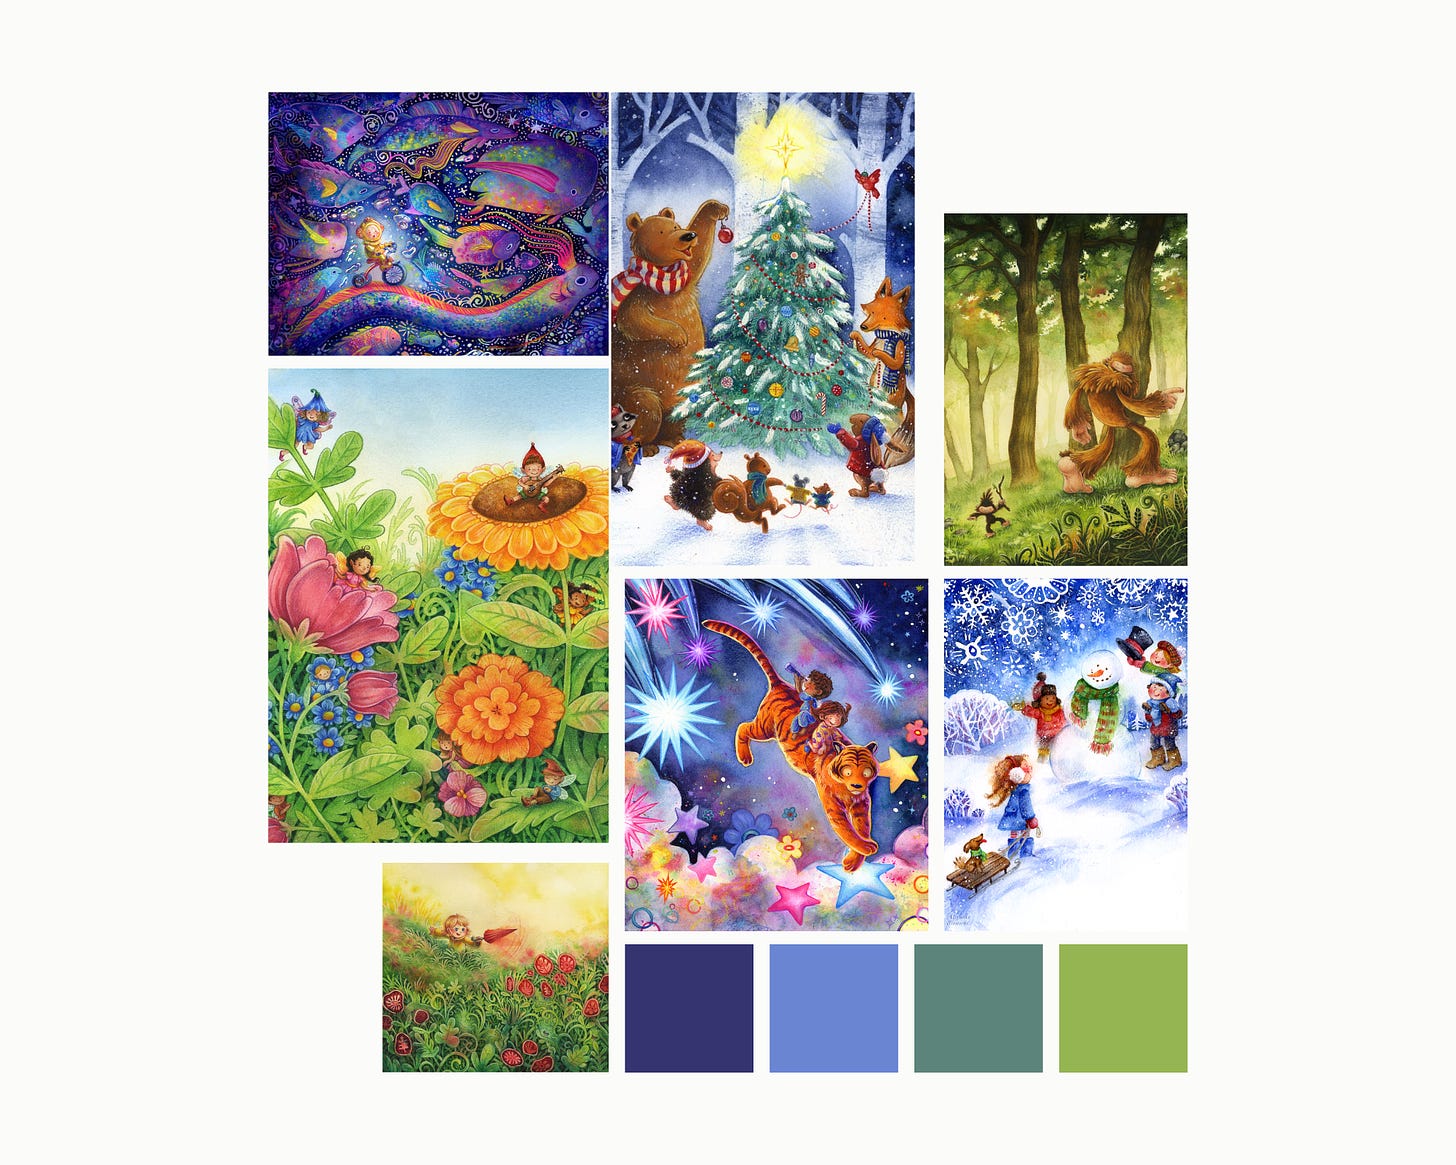 A collage of the illustrator's portfolio, which mainly contains blue and green color palettes.